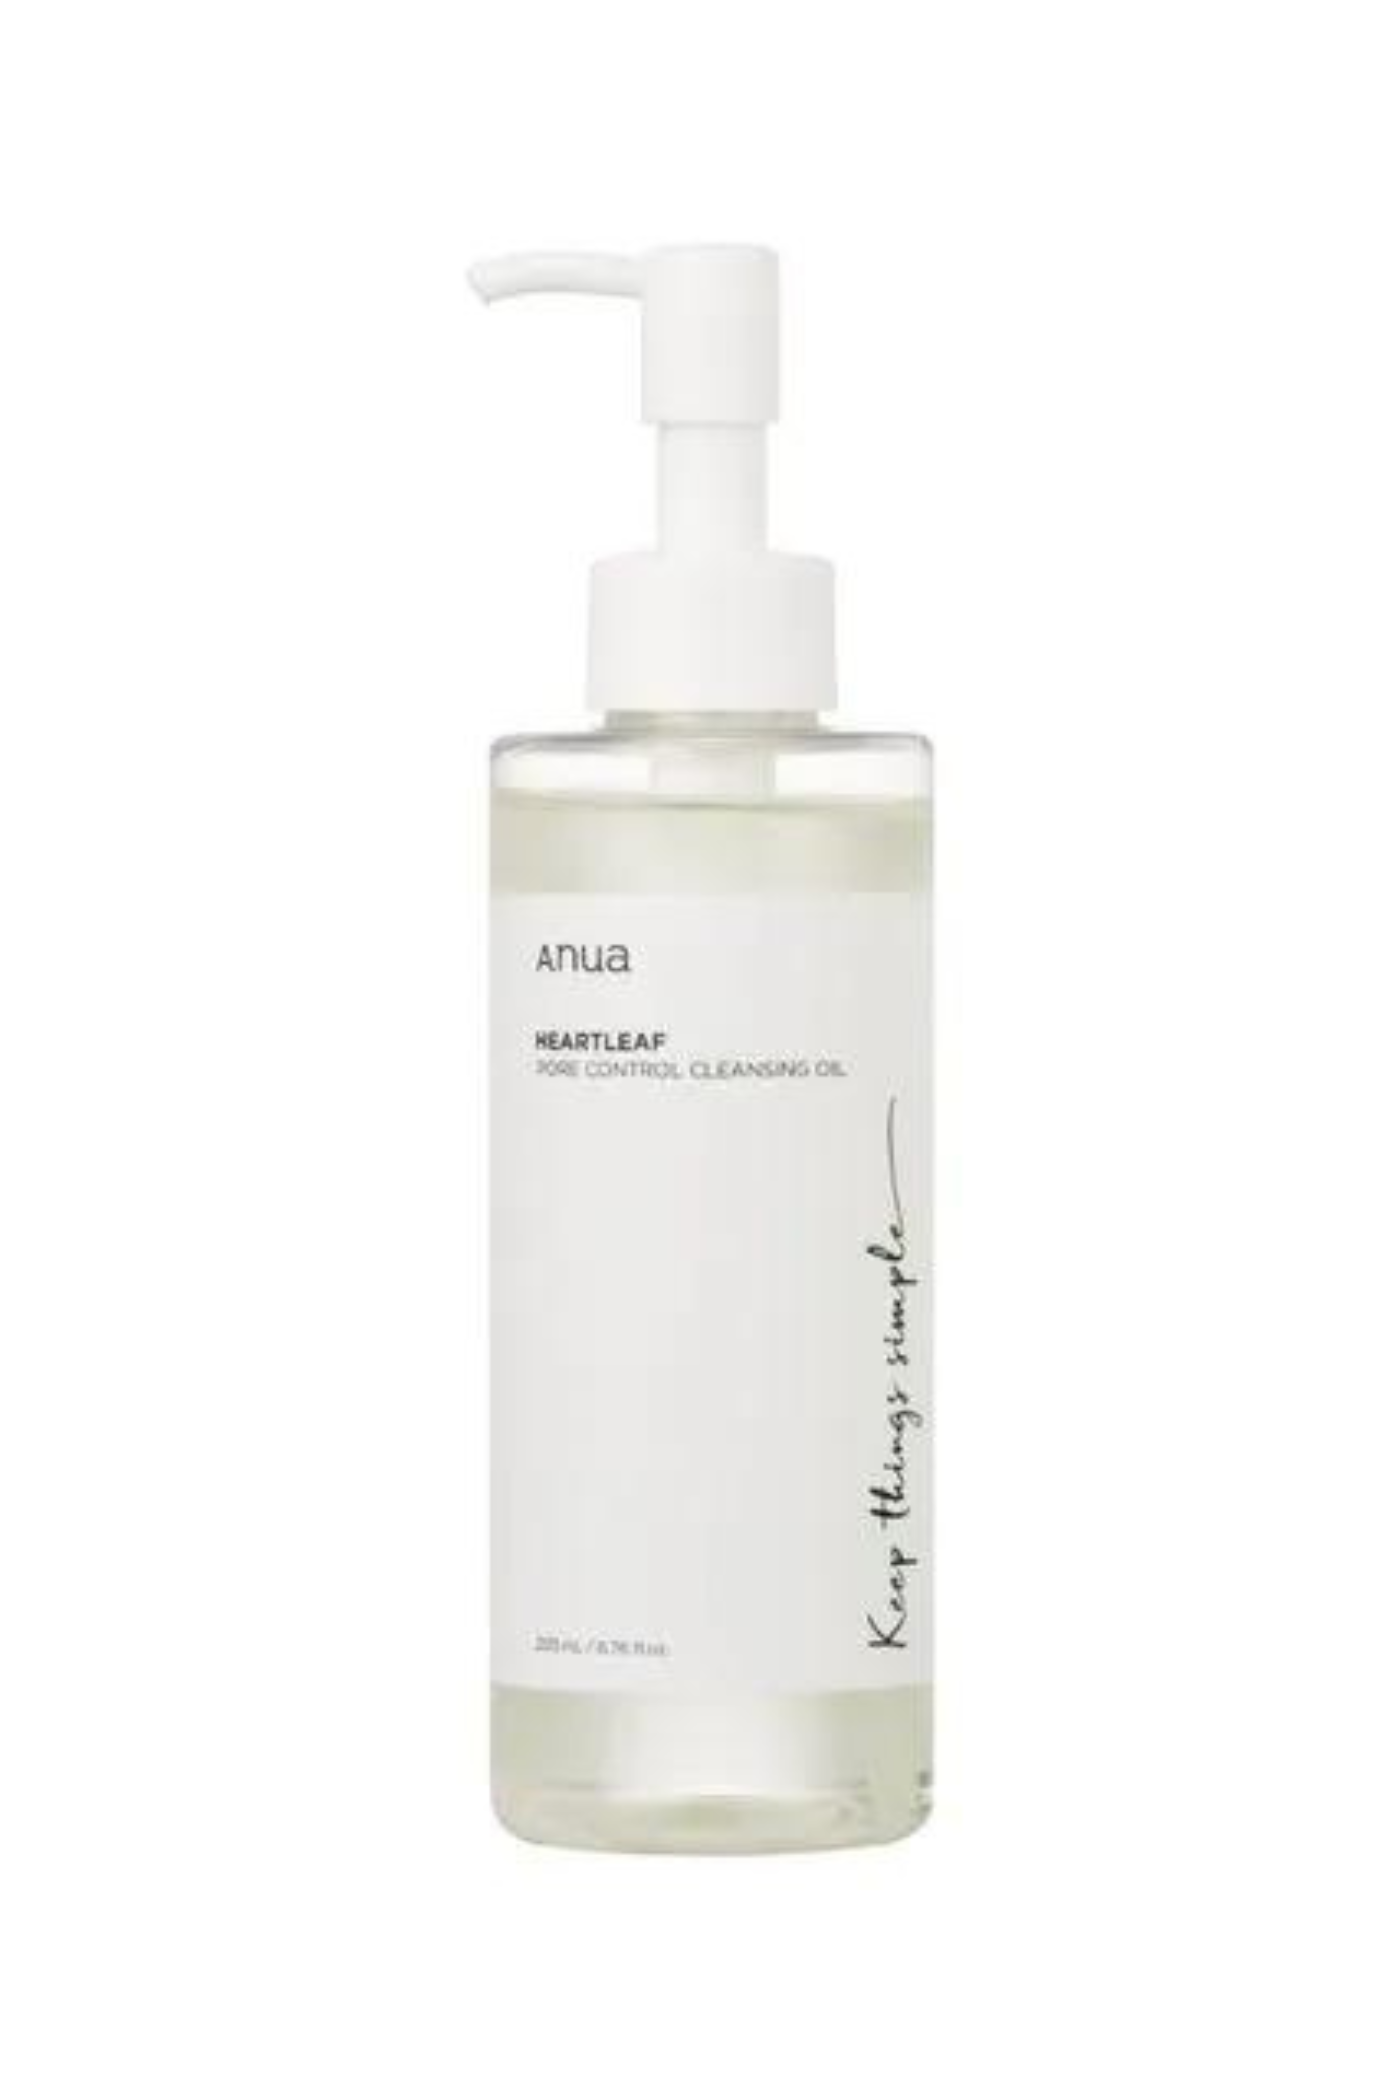 Anua HEARTLEAF PORE CONTROL CLEANSING OIL makeup remover kbeauty